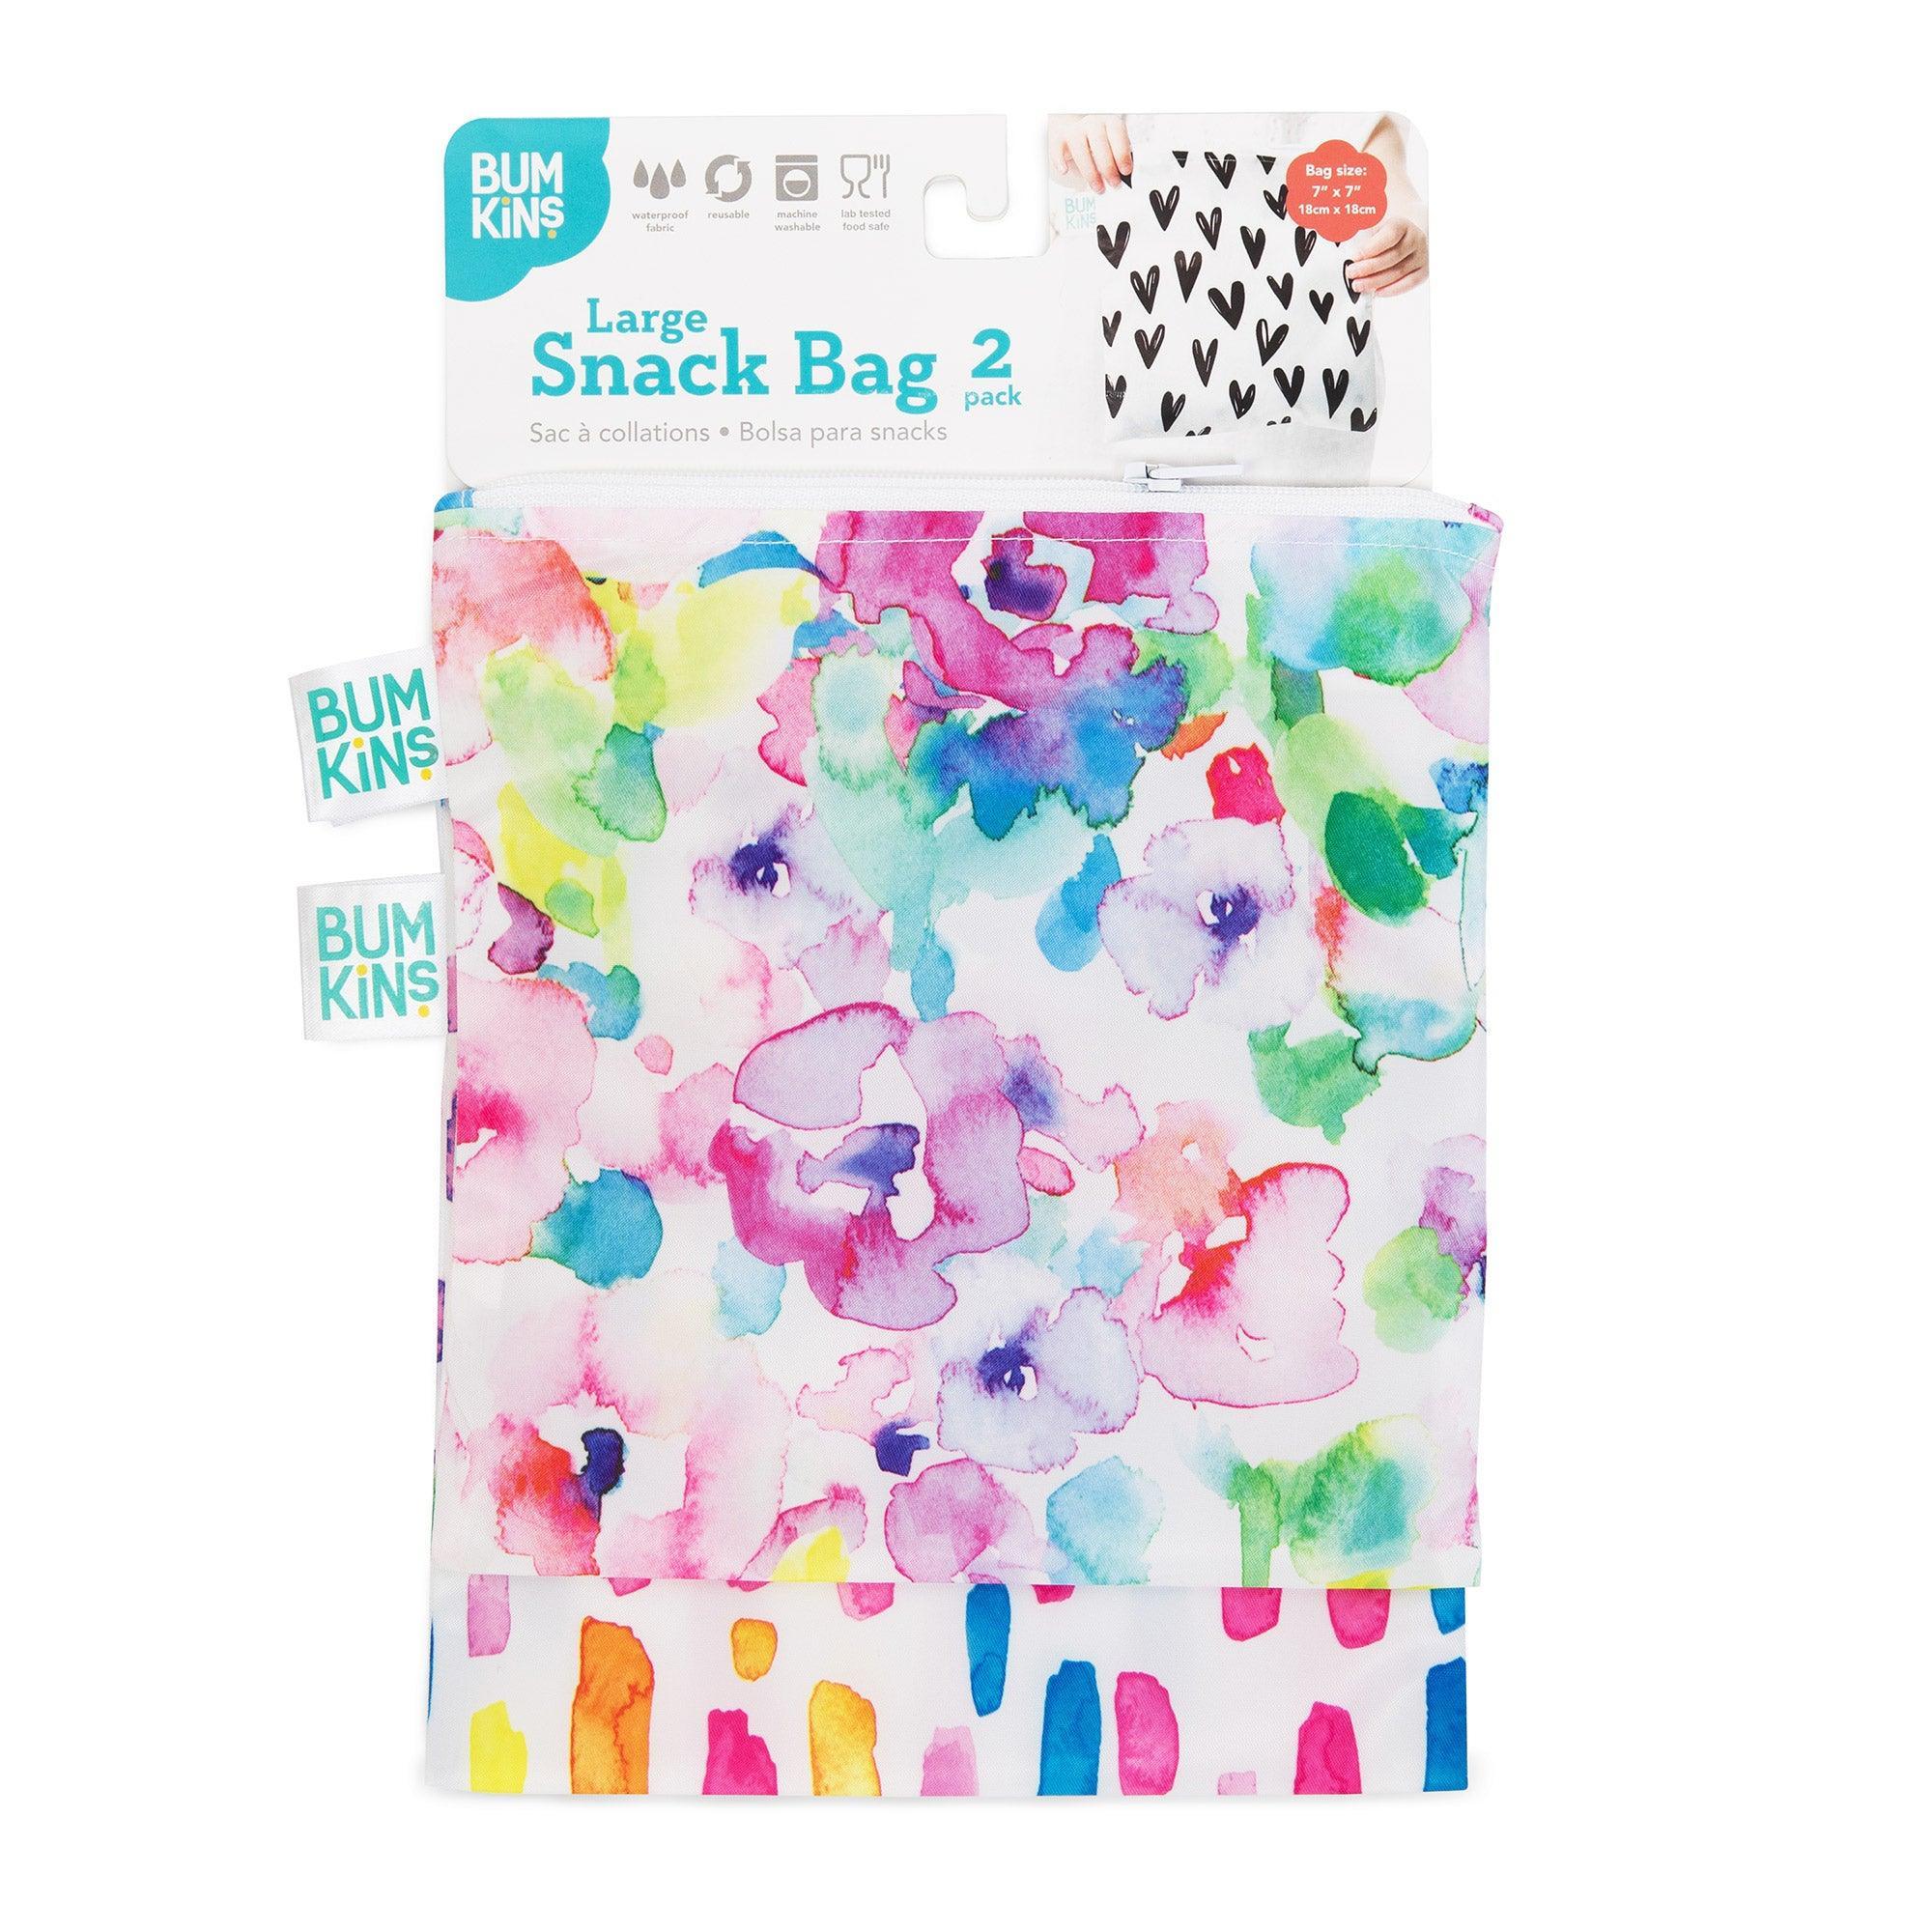 Bumkins Snack Bags, Reusable, Washable, Food Safe, BPA Free, 2-Pack Watercolor